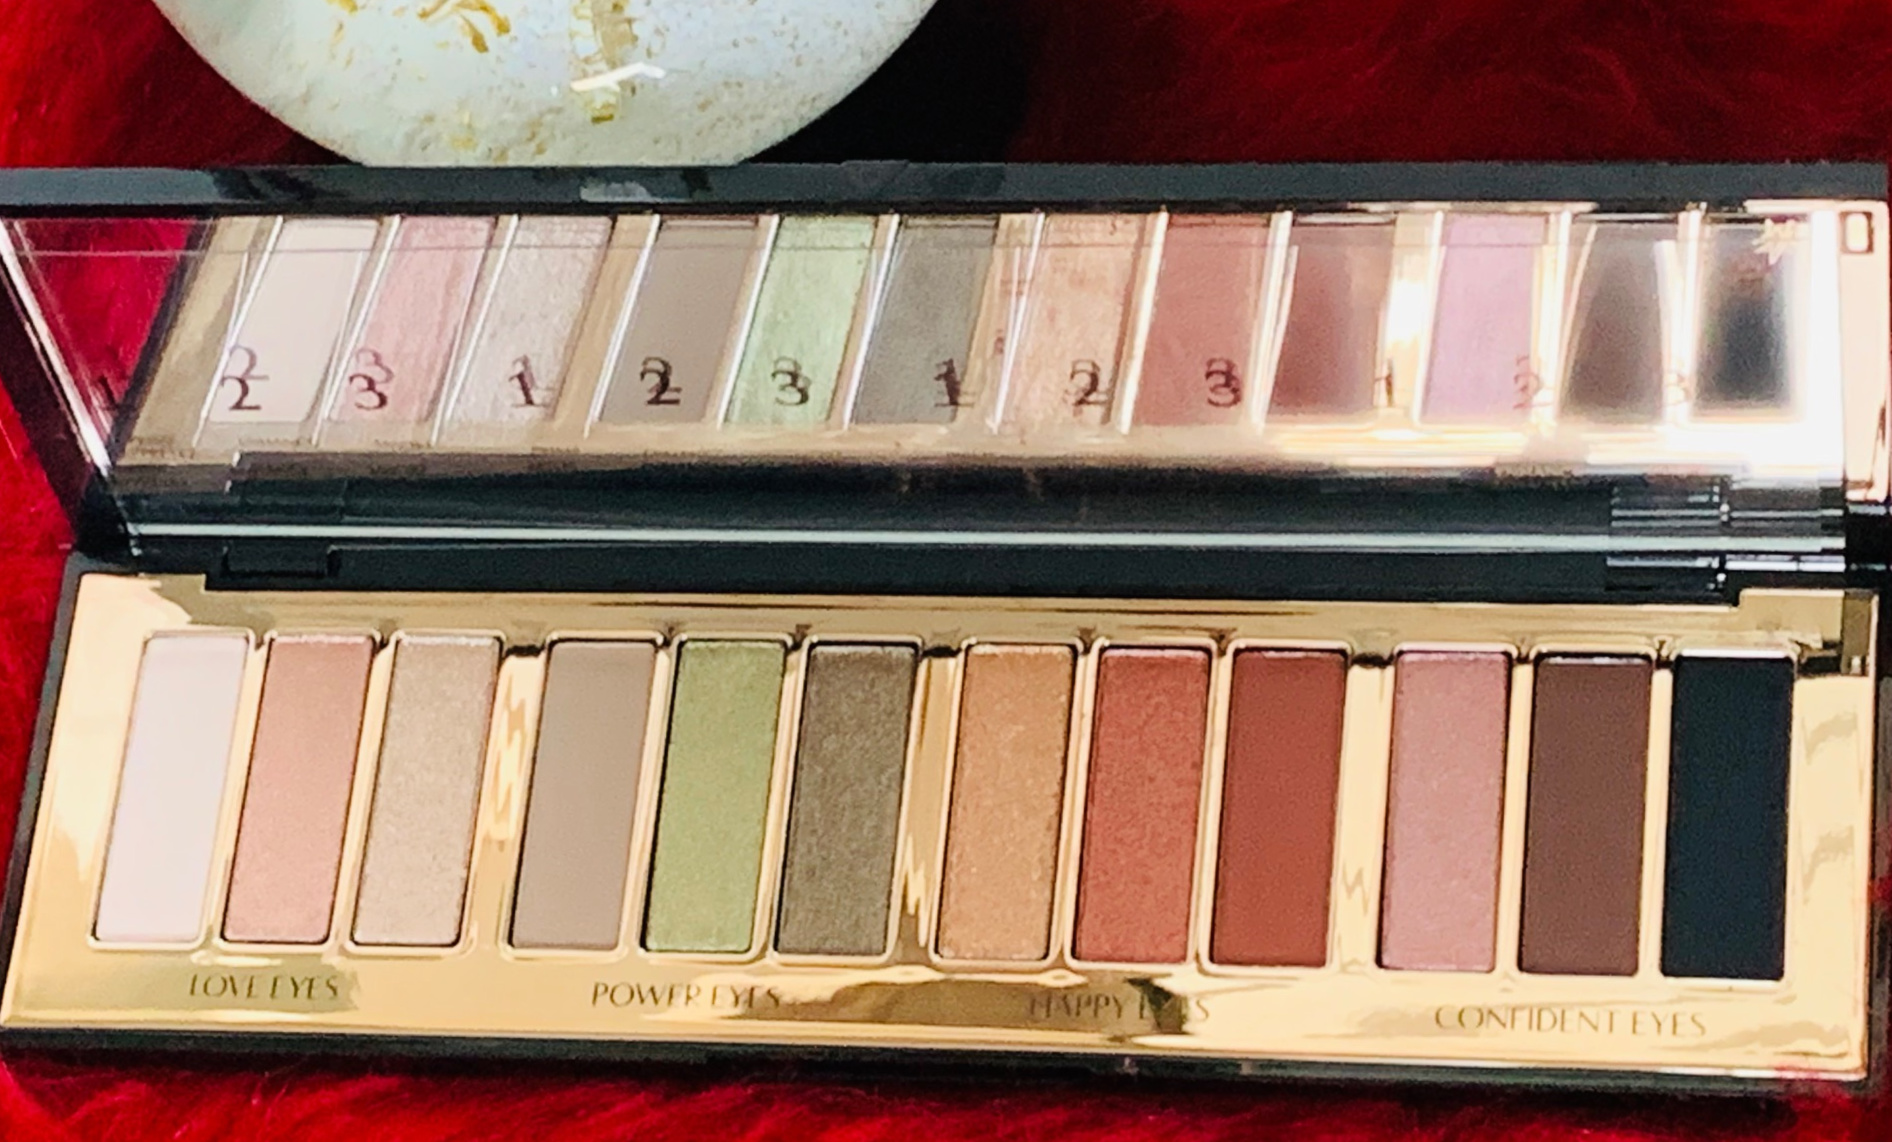 Charlotte Tilbury Smokey Eyes Are Forever Palette Review